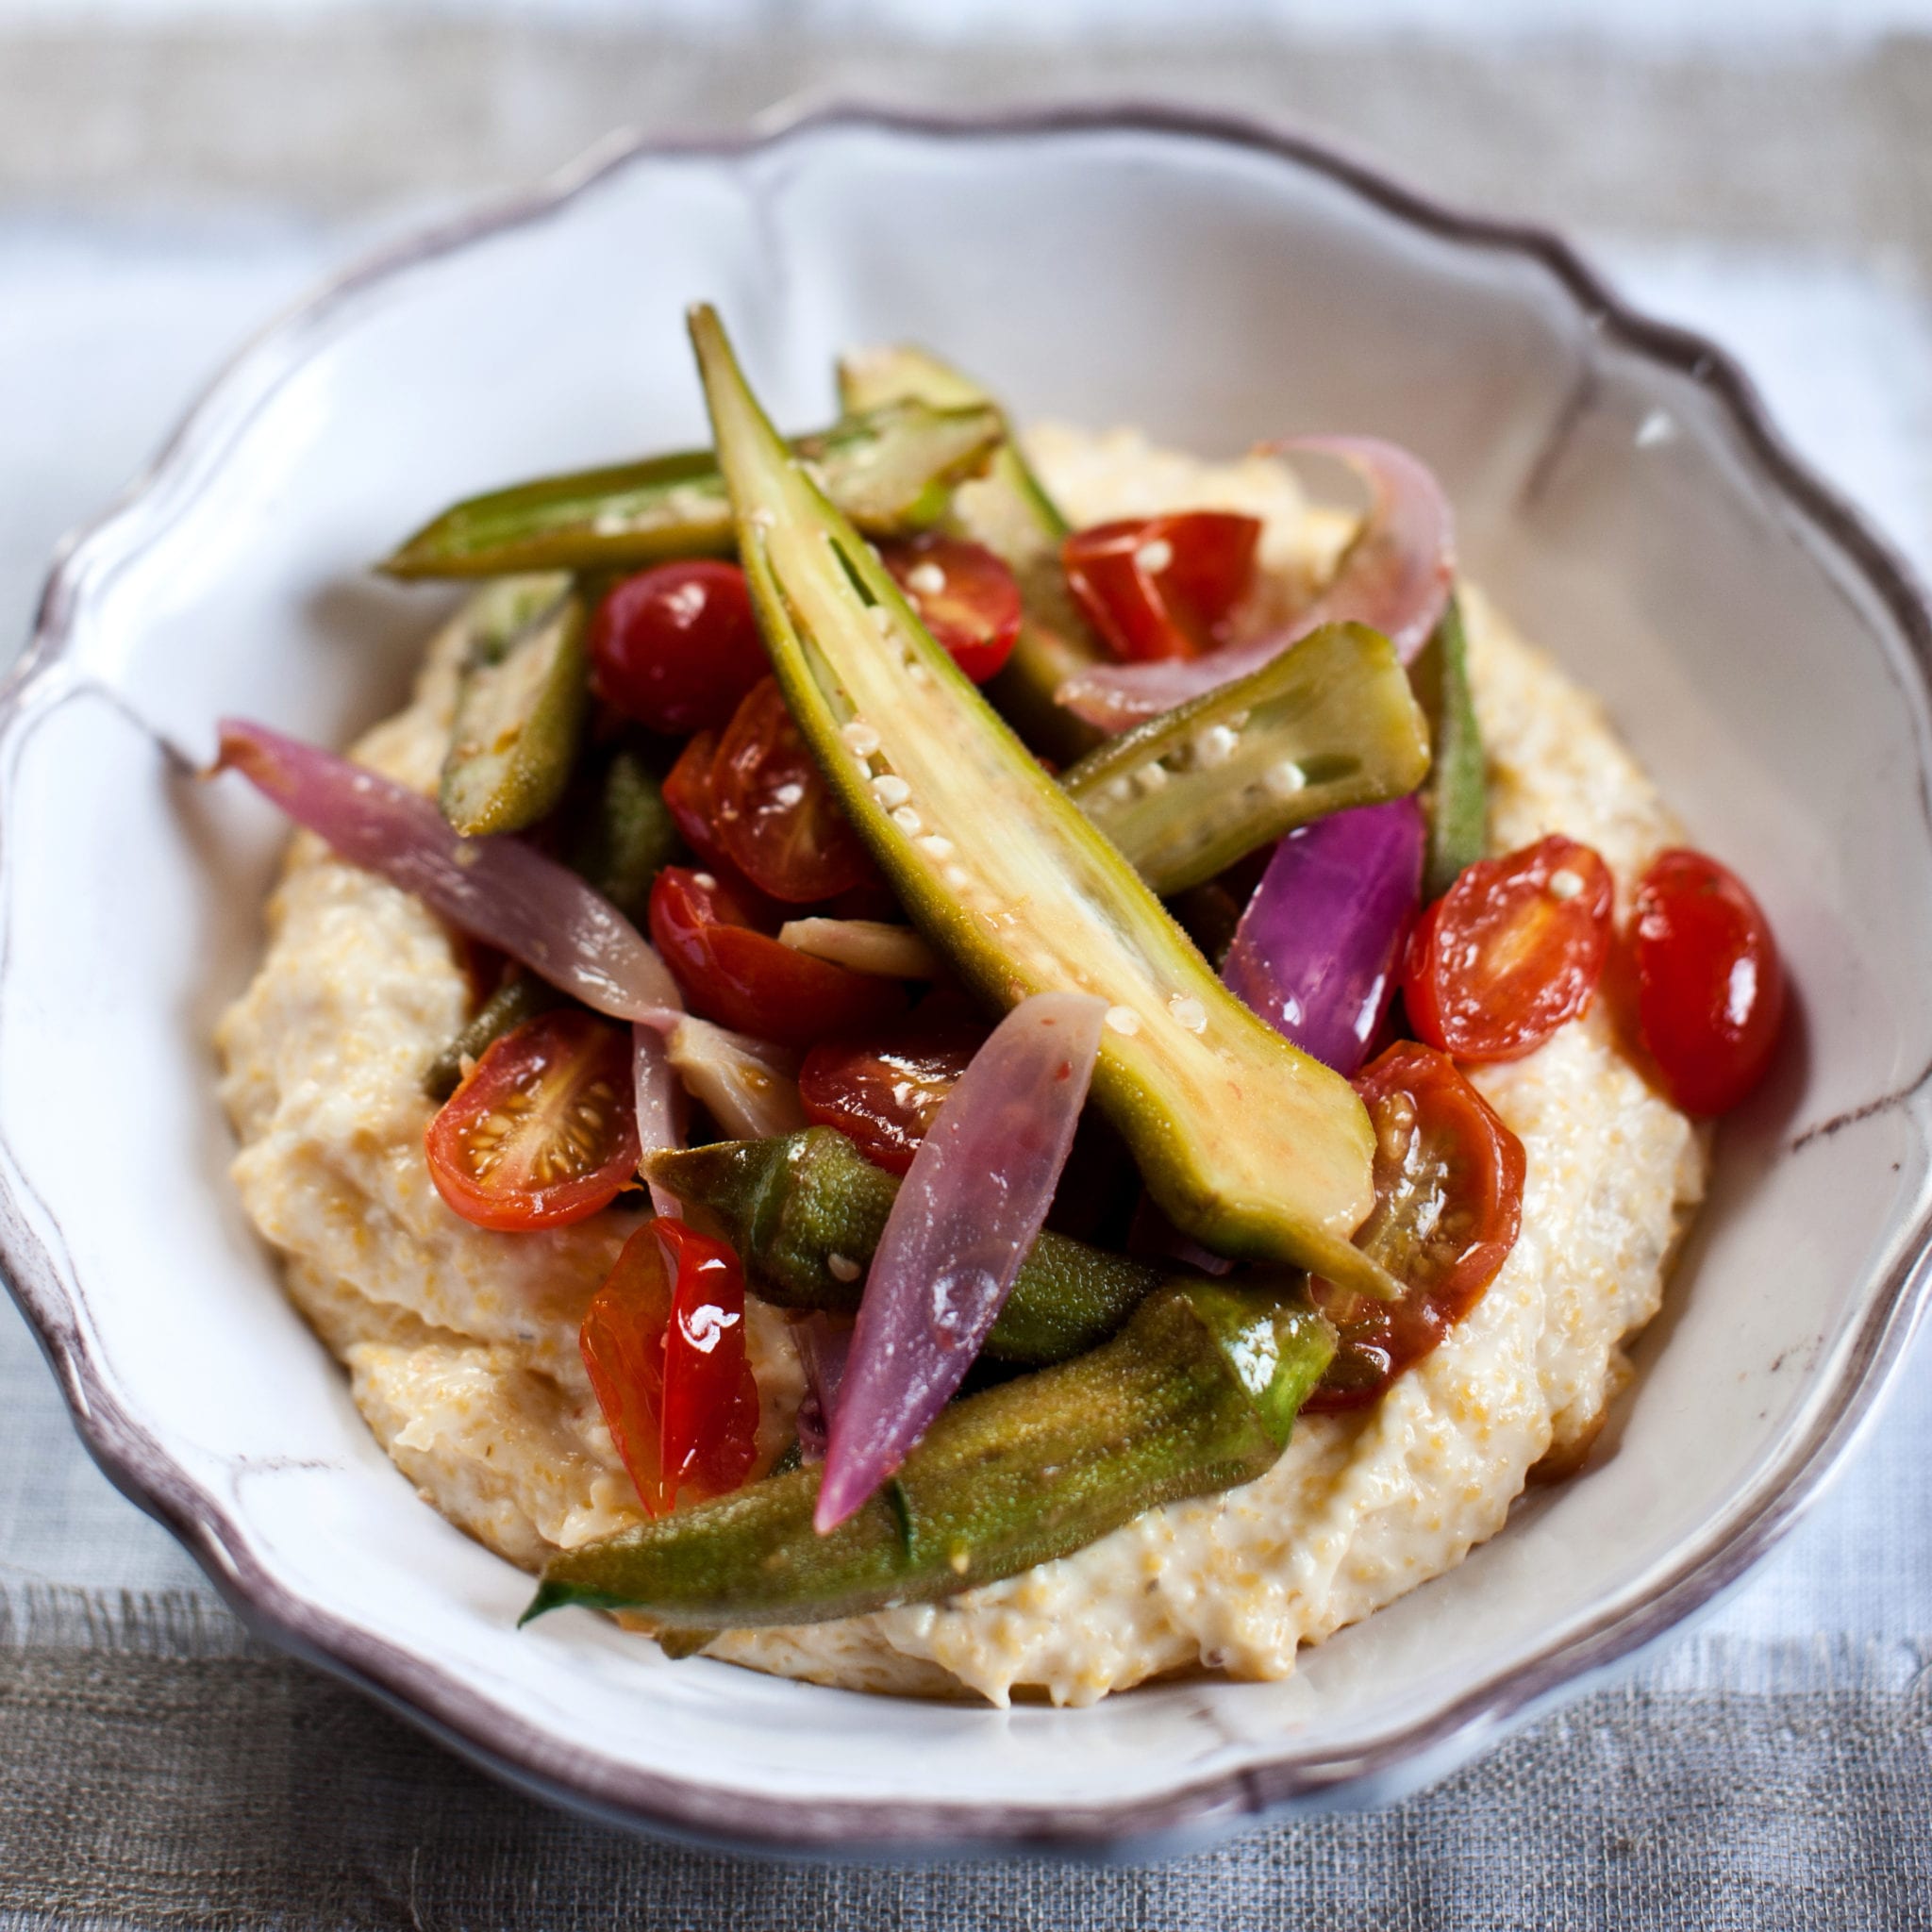 Pan-Fried-Okra-Shallots-and-Tomatoes-Over-Grits